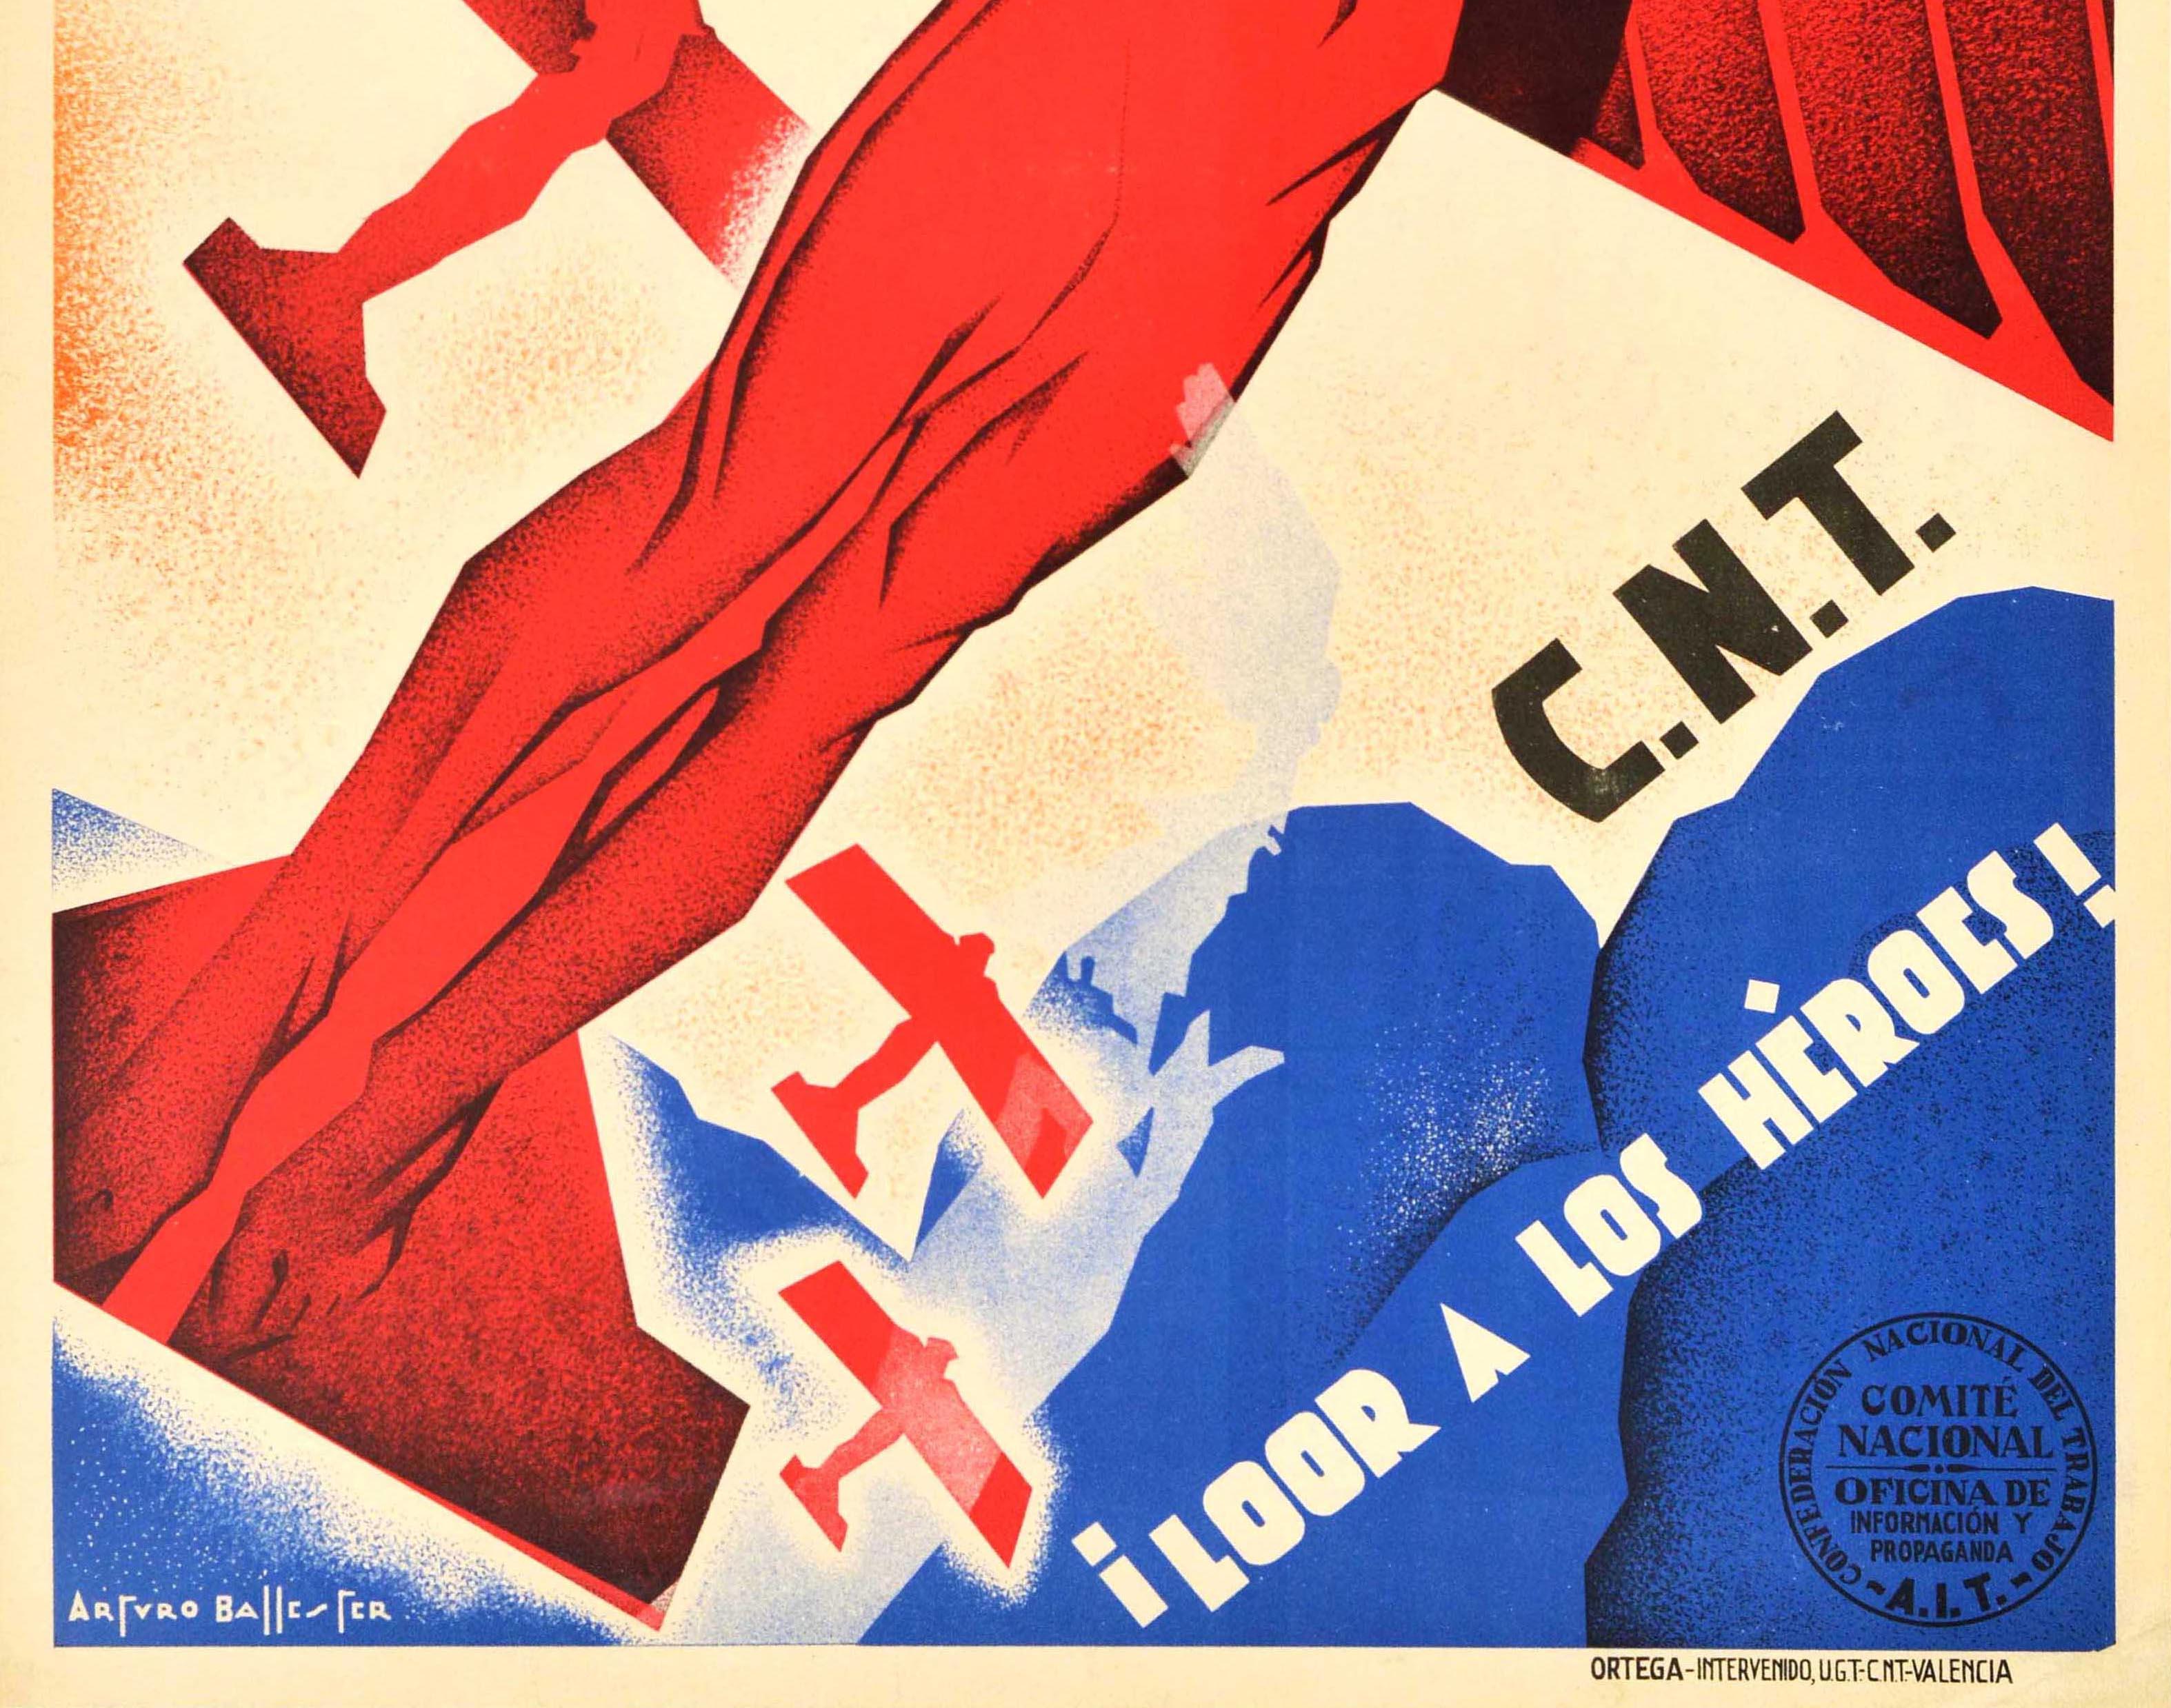 Original vintage Spanish Civil War propaganda poster - C.N.T Loor a los Heroes! / CNT Hail to the Heroes! Dynamic design by the Spanish artist Arturo Ballester Marco (1892-1981) depicting men as planes with wings on their outstretched arms and plane